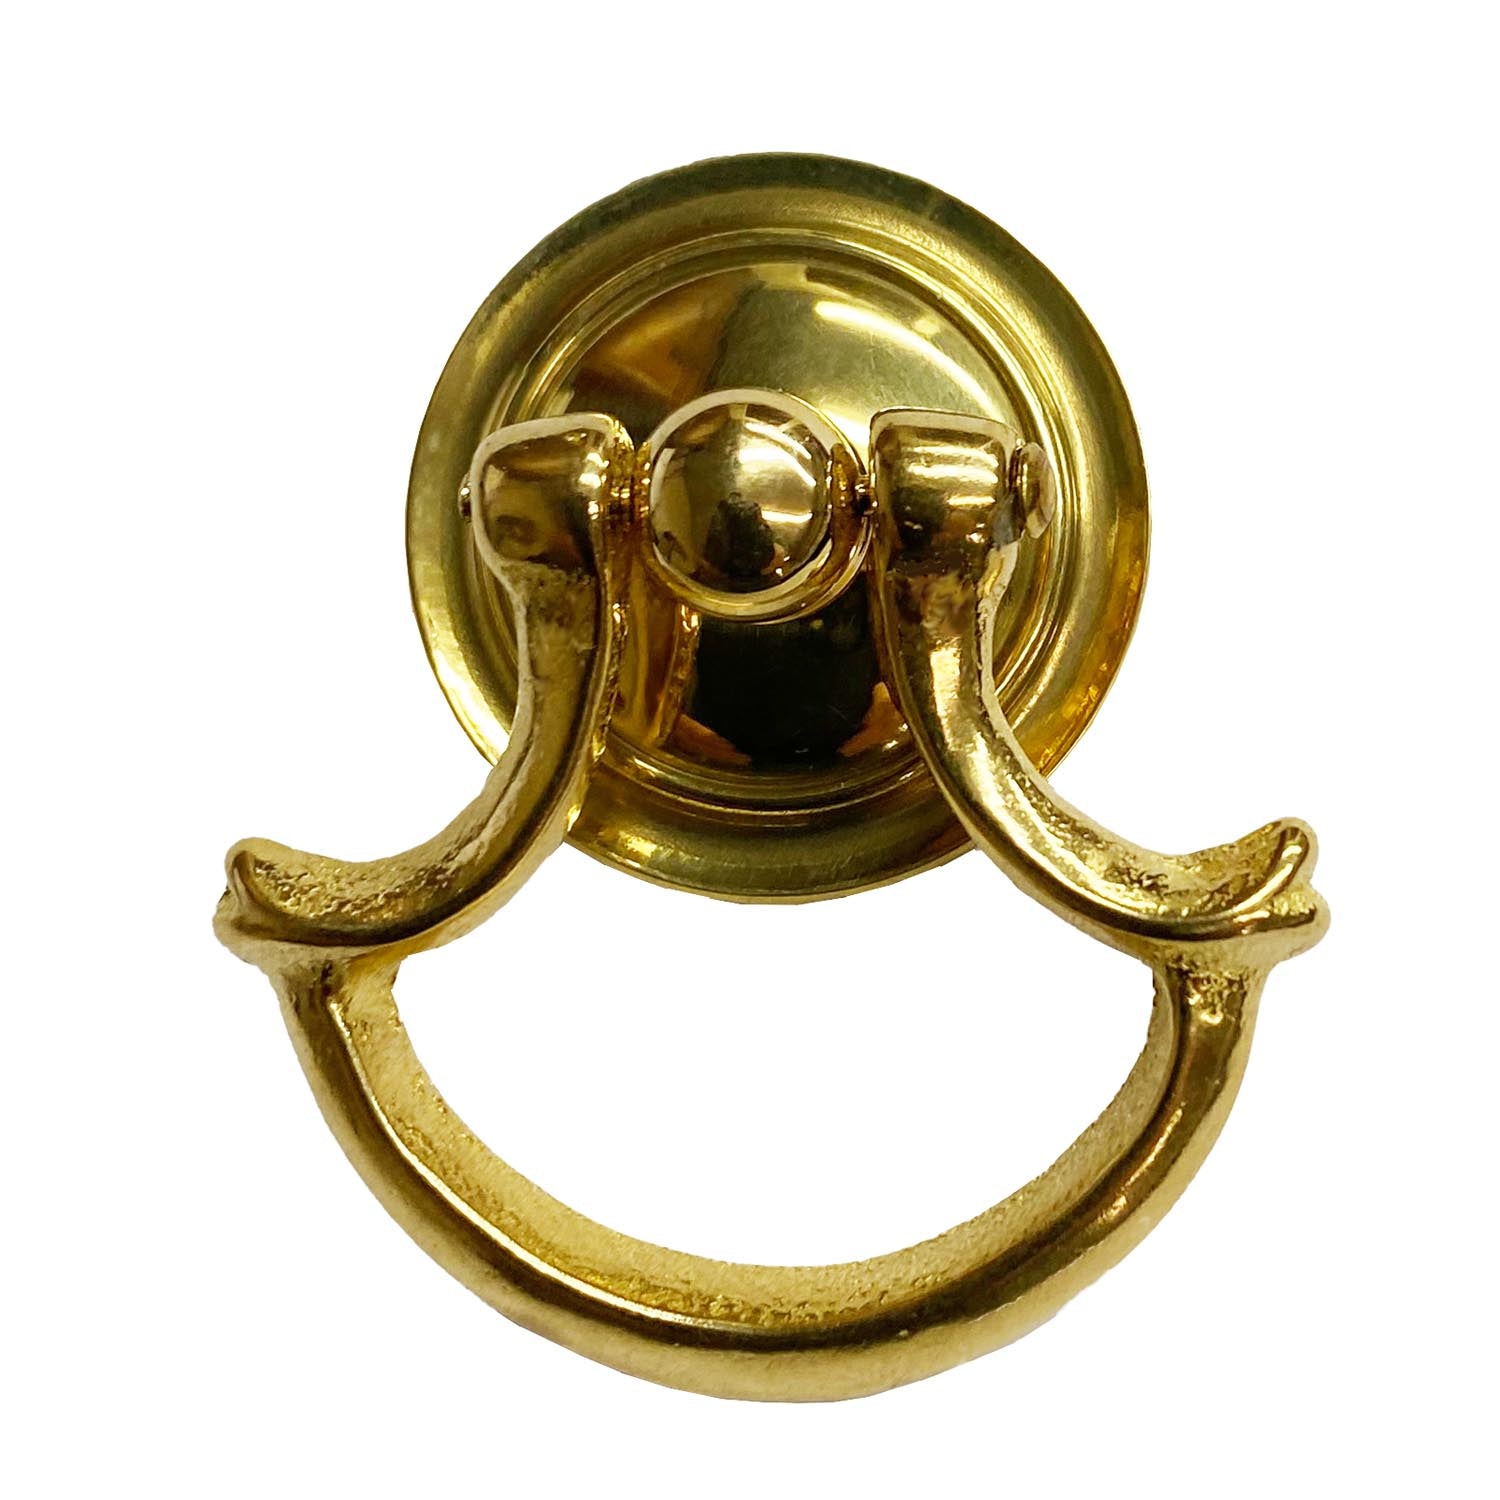 As-Is) 3 Traditional Chippendale Bail Pull Satin Brass - D. Lawless  Hardware